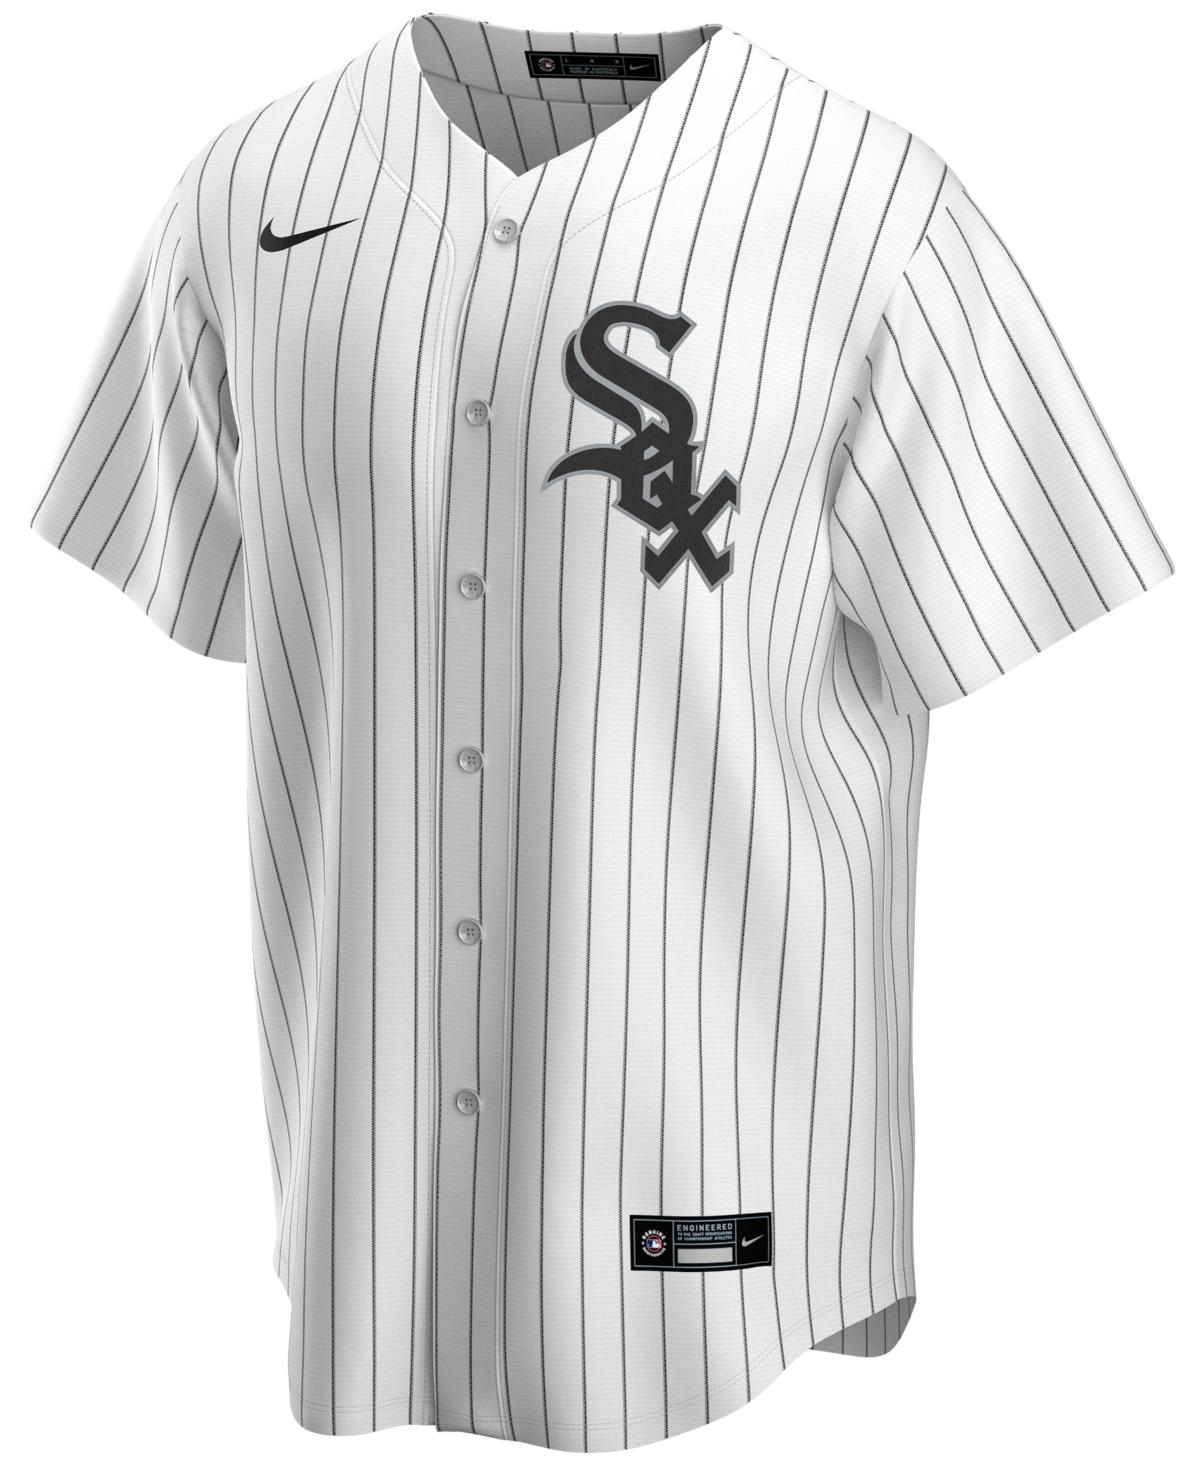 Nike Men's Eloy Jimenez Black Chicago White Sox City Connect Name and  Number T-shirt